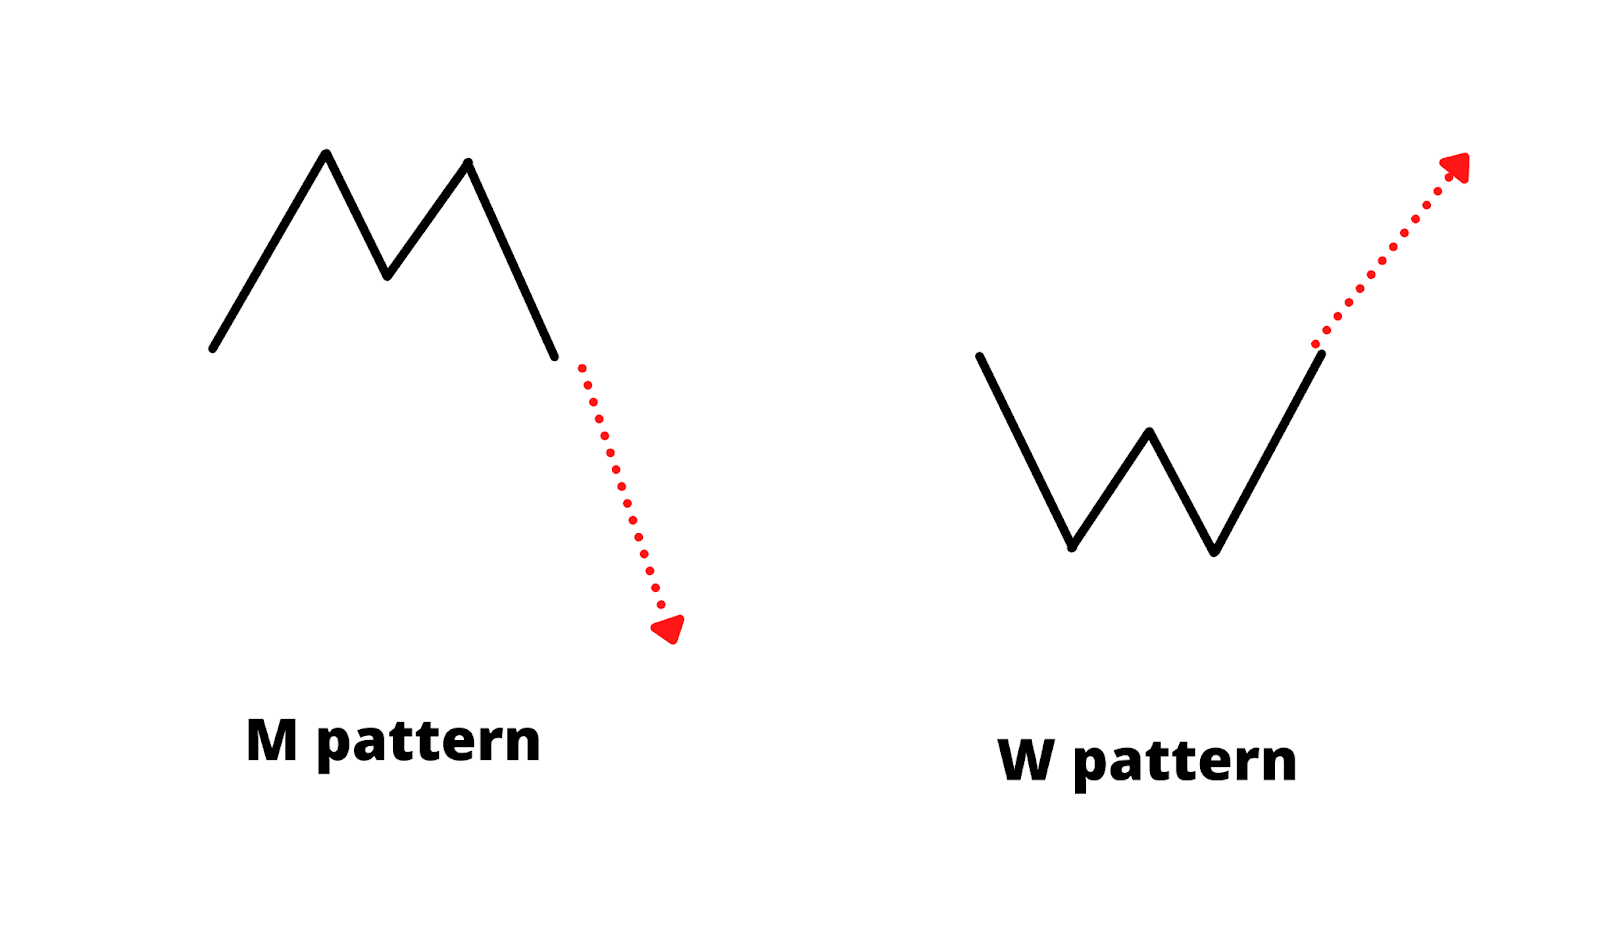 M and W patterns